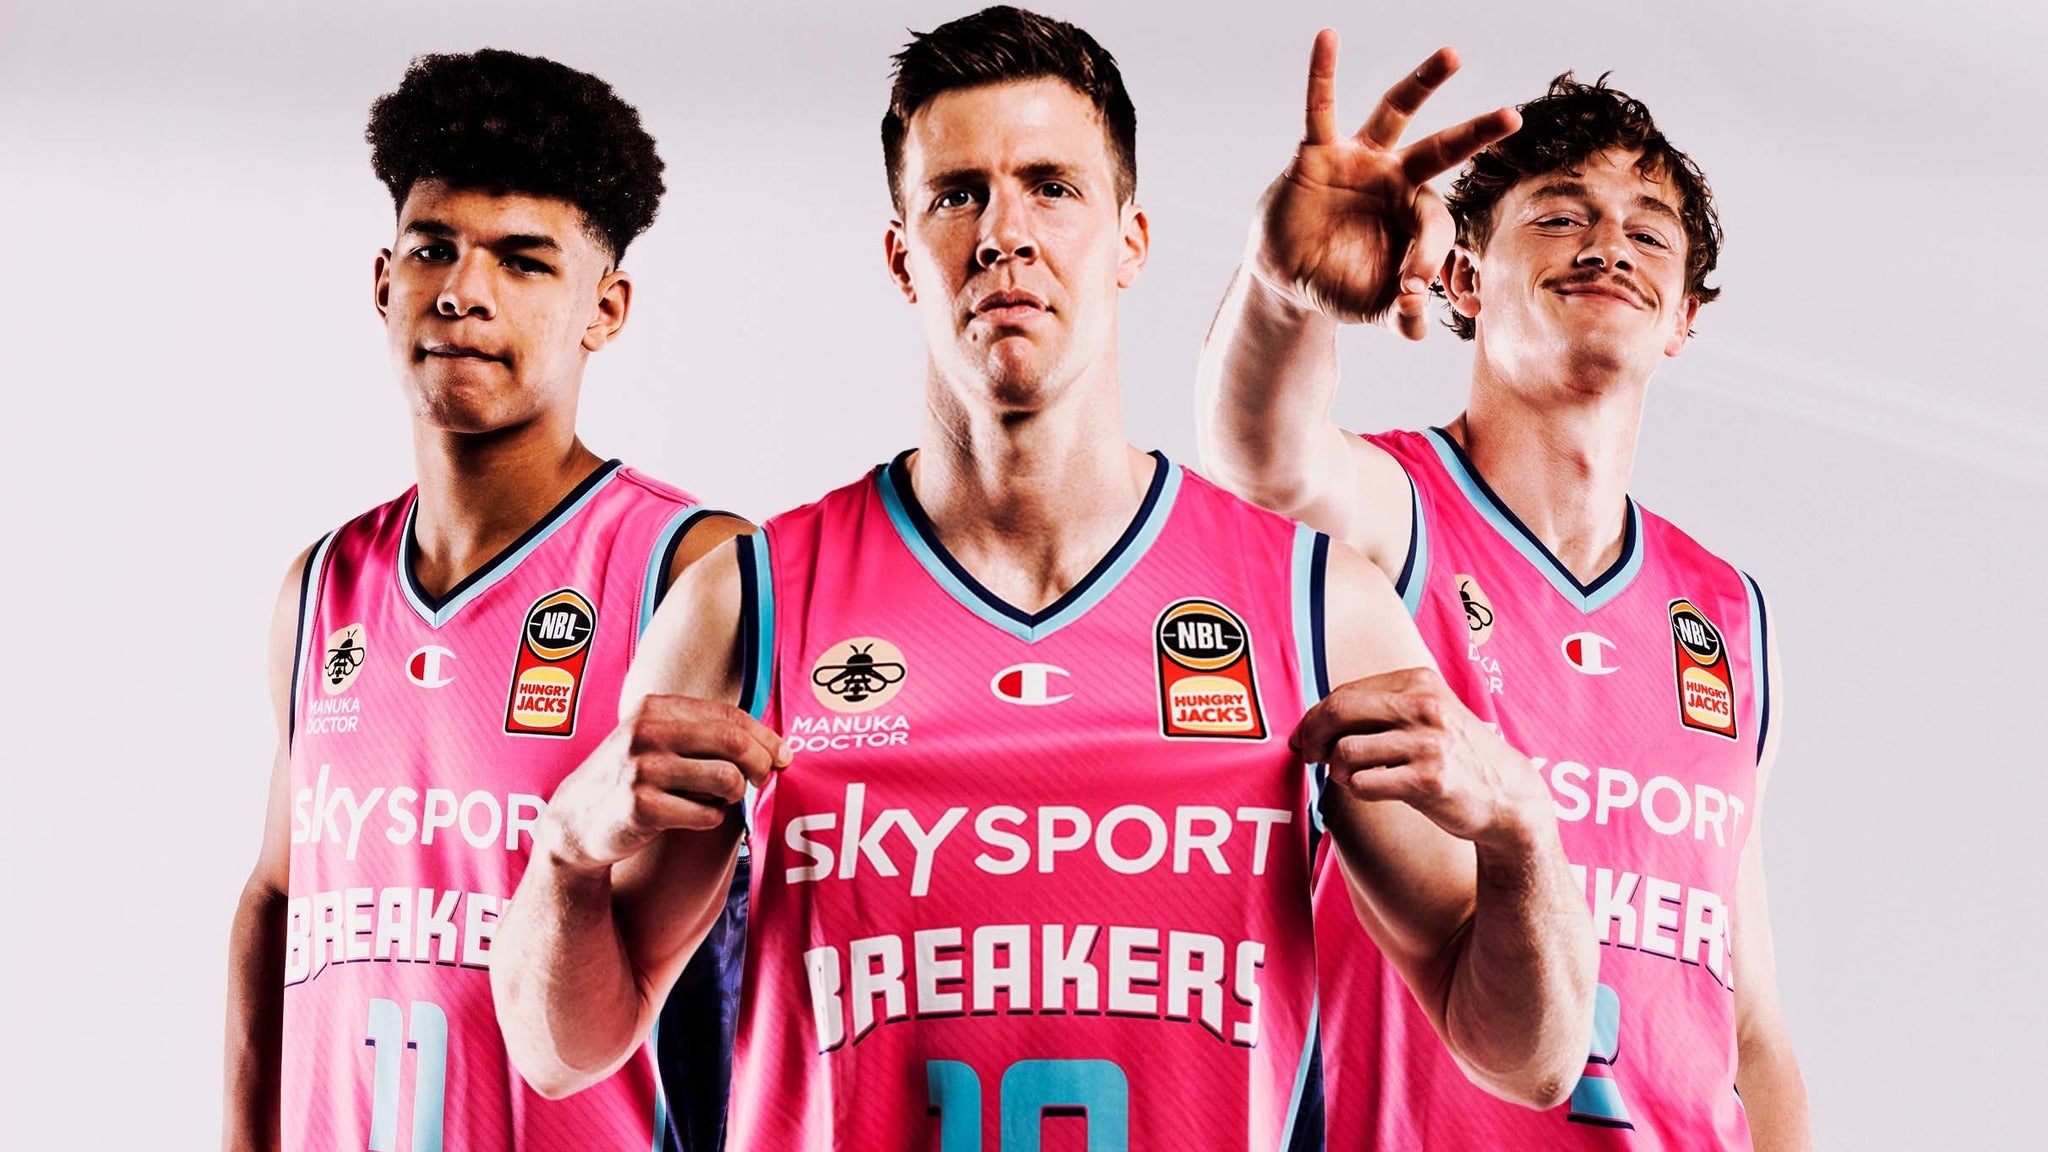 Image used with permission from Ticketmaster | Sky Sport Breakers v Perth Wildcats tickets